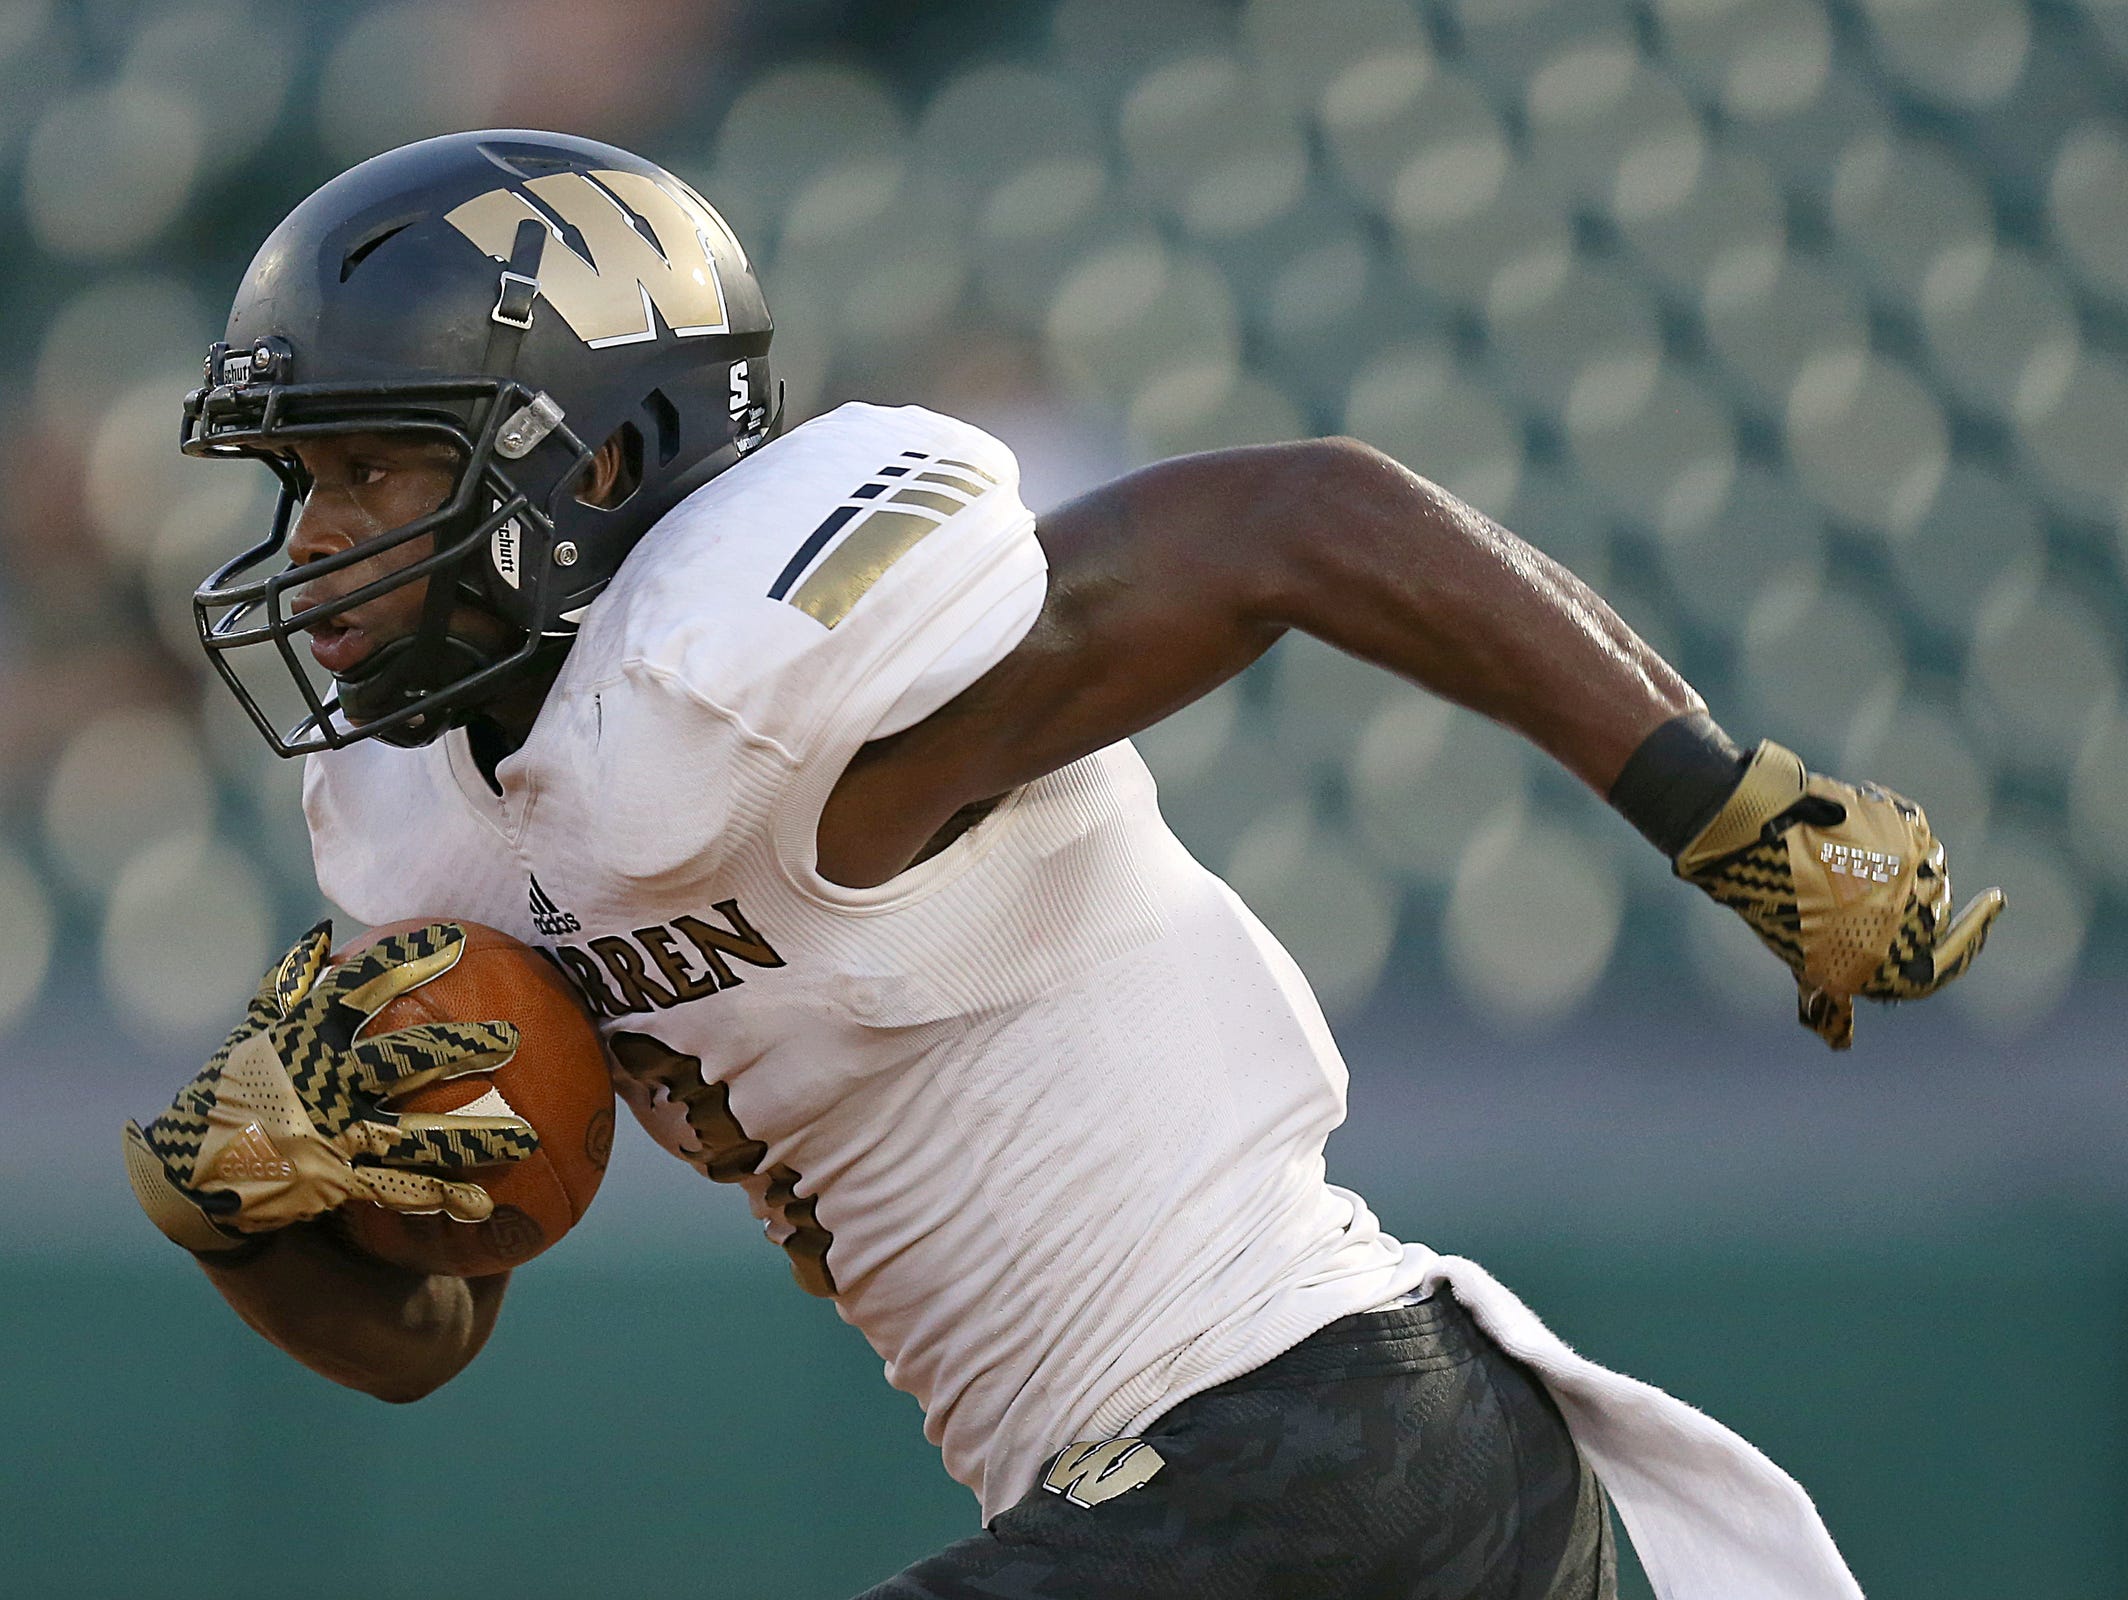 Warren Central Warriors Dijon Anderson (3) makes a long run down the field leading the Warriors to a touchdown on the next play, during first half action of the Gridiron Classic at Victory Field, Indianapolis, Friday, September 23, 2016.